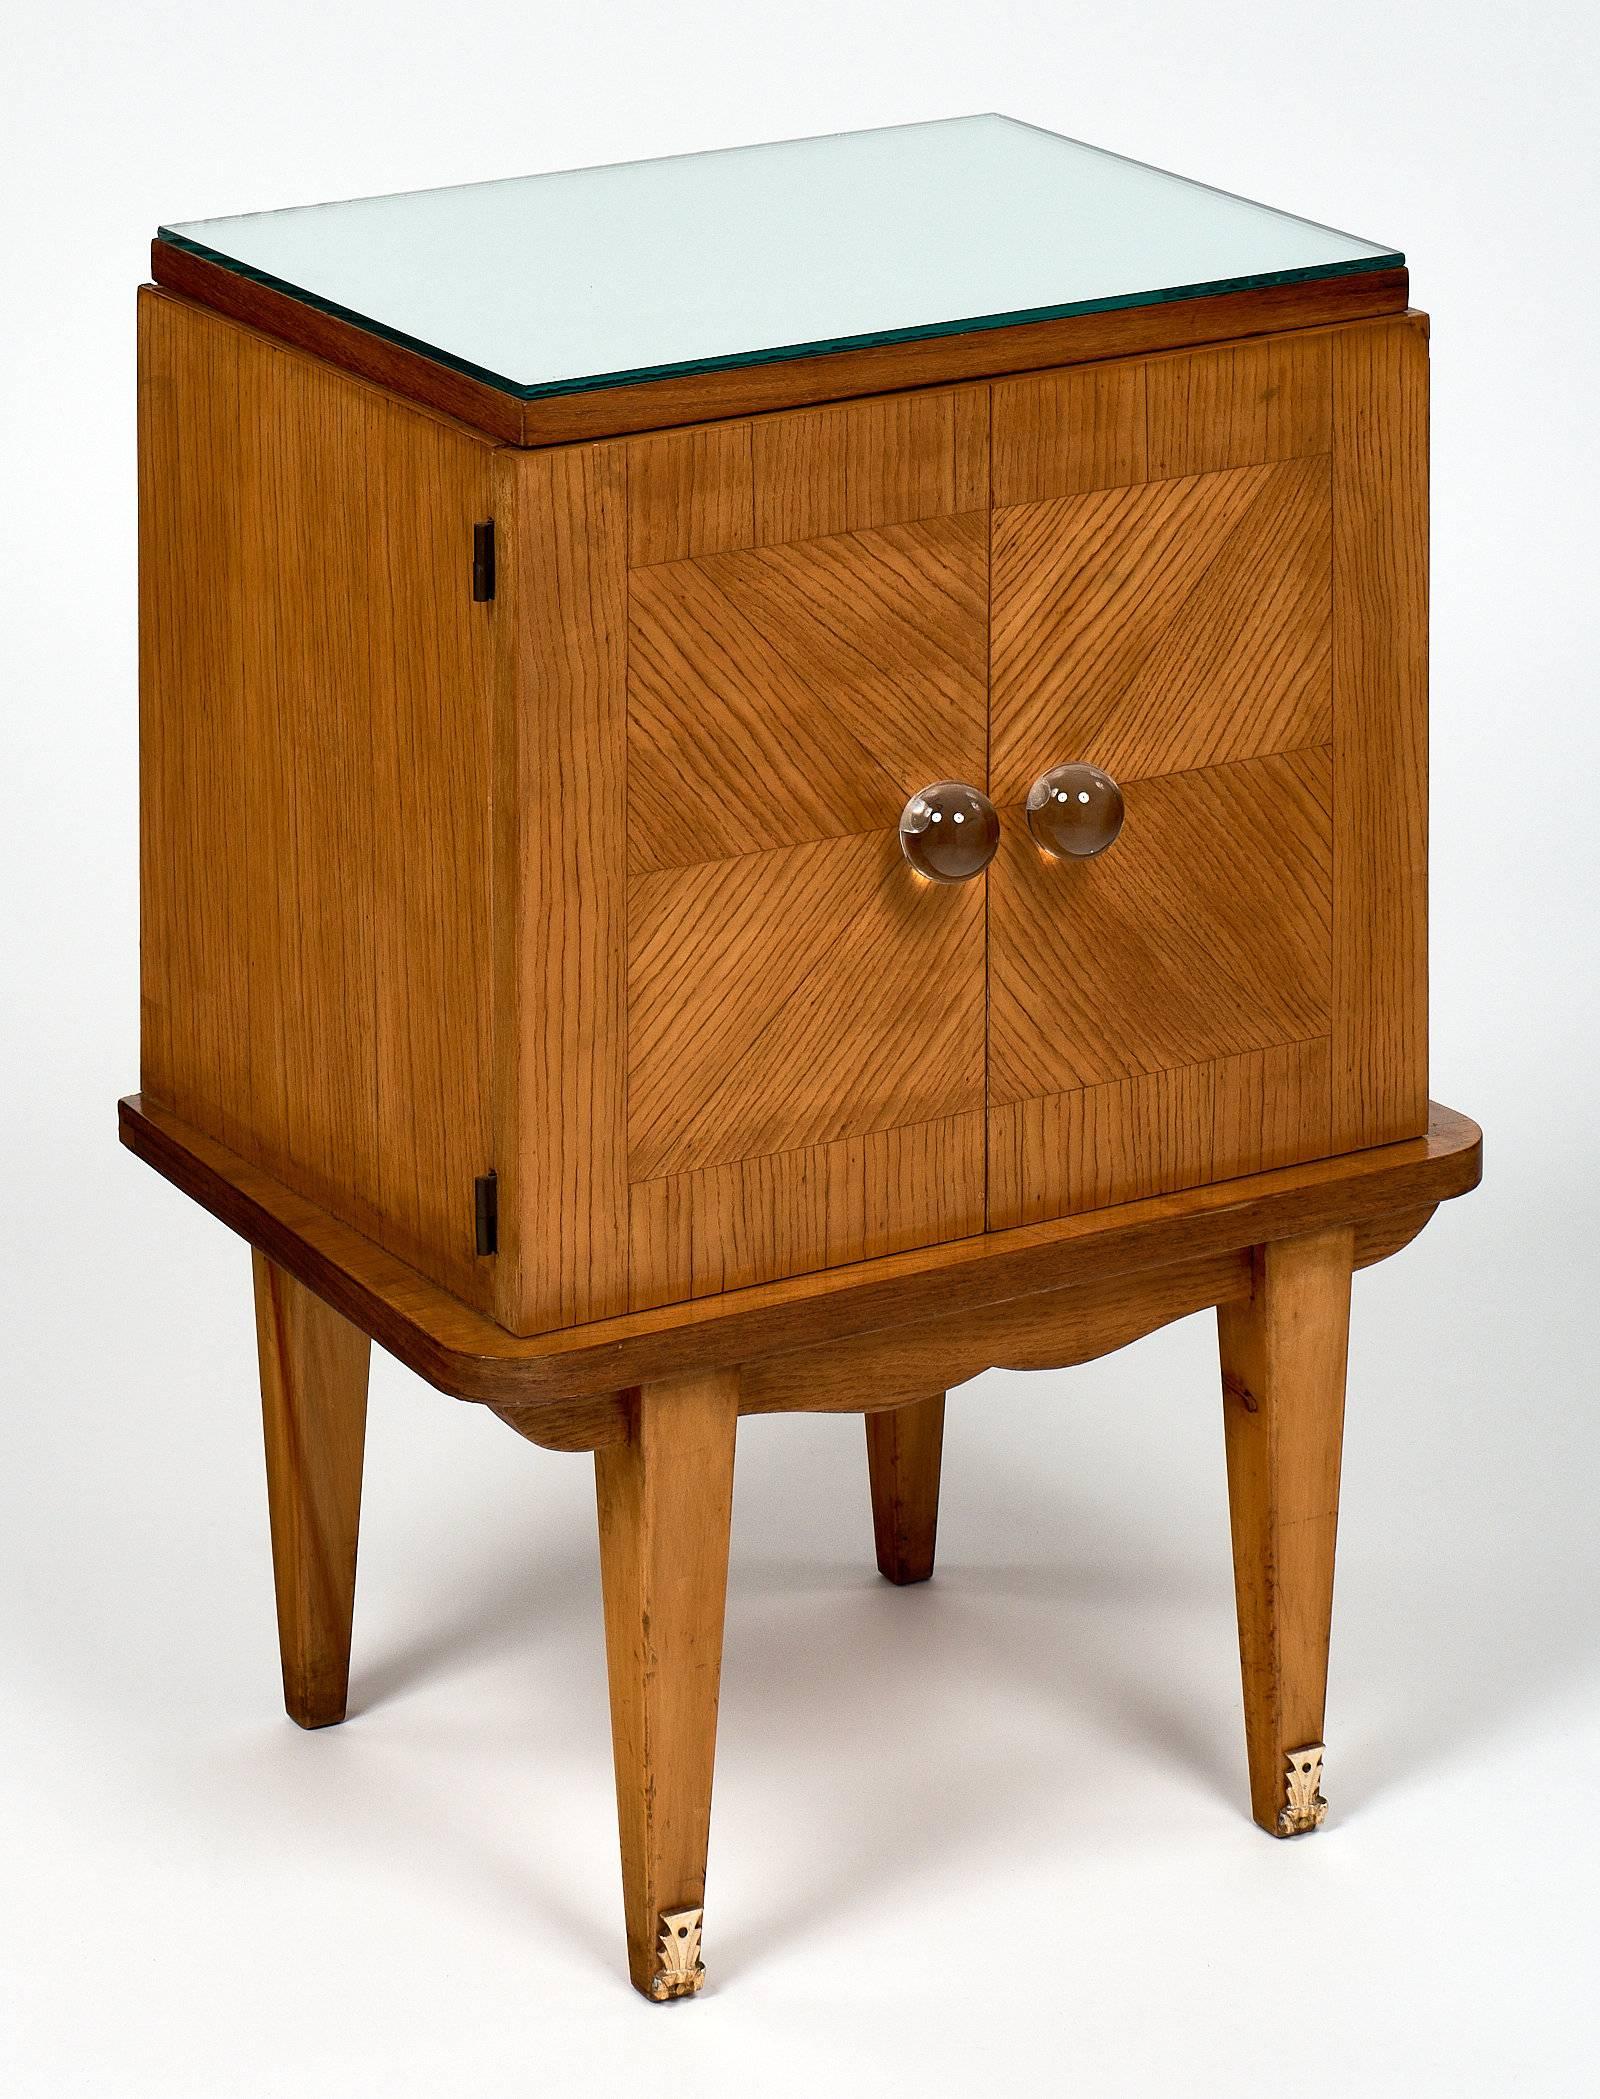 A pair of French Mid-Century Modern side tables, each featuring two doors with clear Murano glass knobs and a single shelf inside. The tables are made of rosewood with mirrored tops. The legs are tapered with gilt brass elements on the front two.